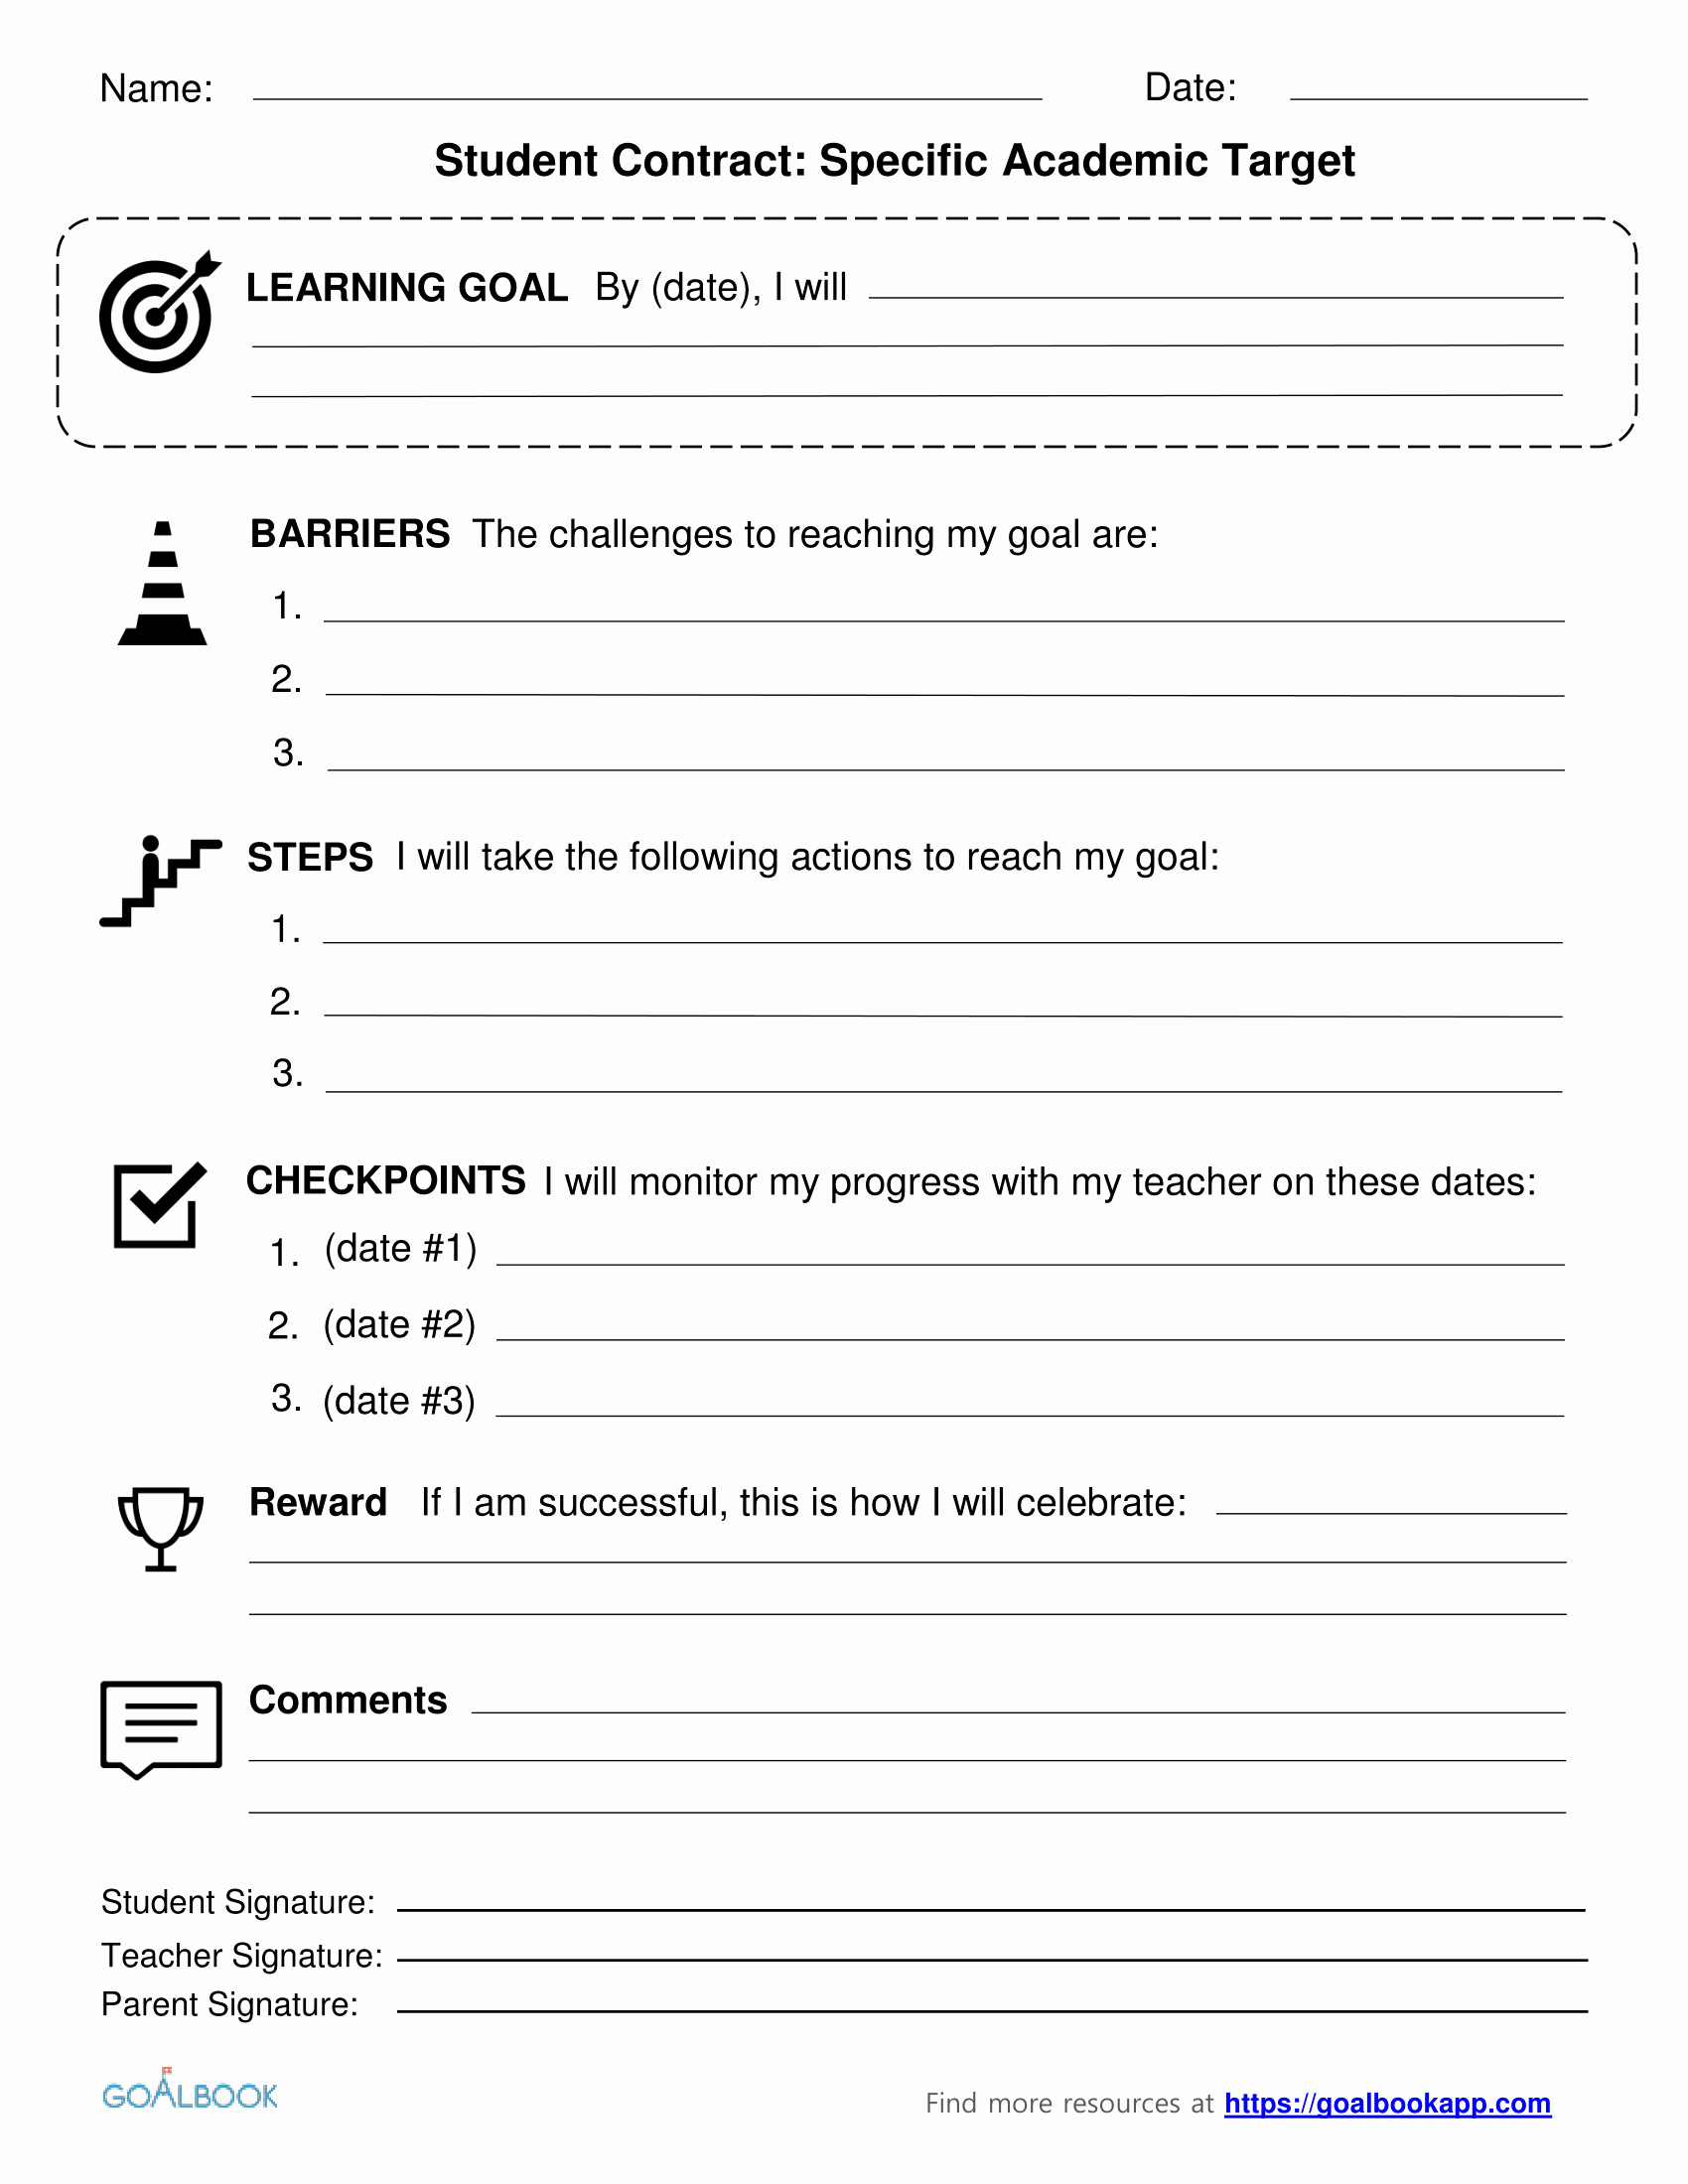 Student Academic Contract Template New Contracts